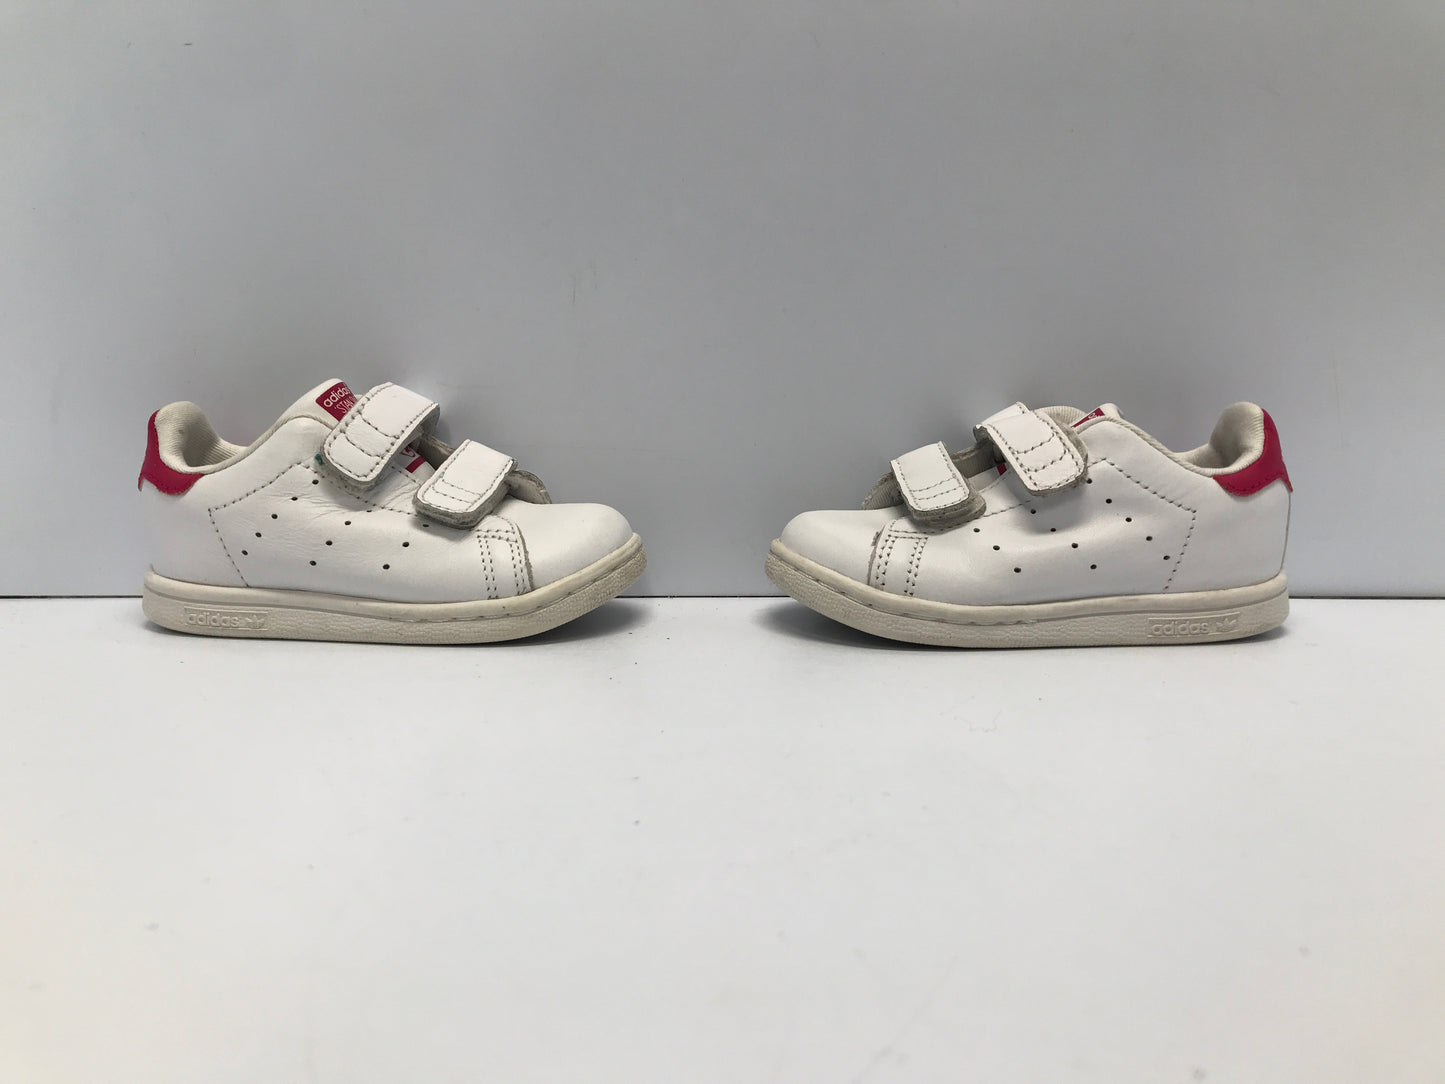 Runners Infant Baby Size 6 Adidas Stan Smite White PInk Excellent